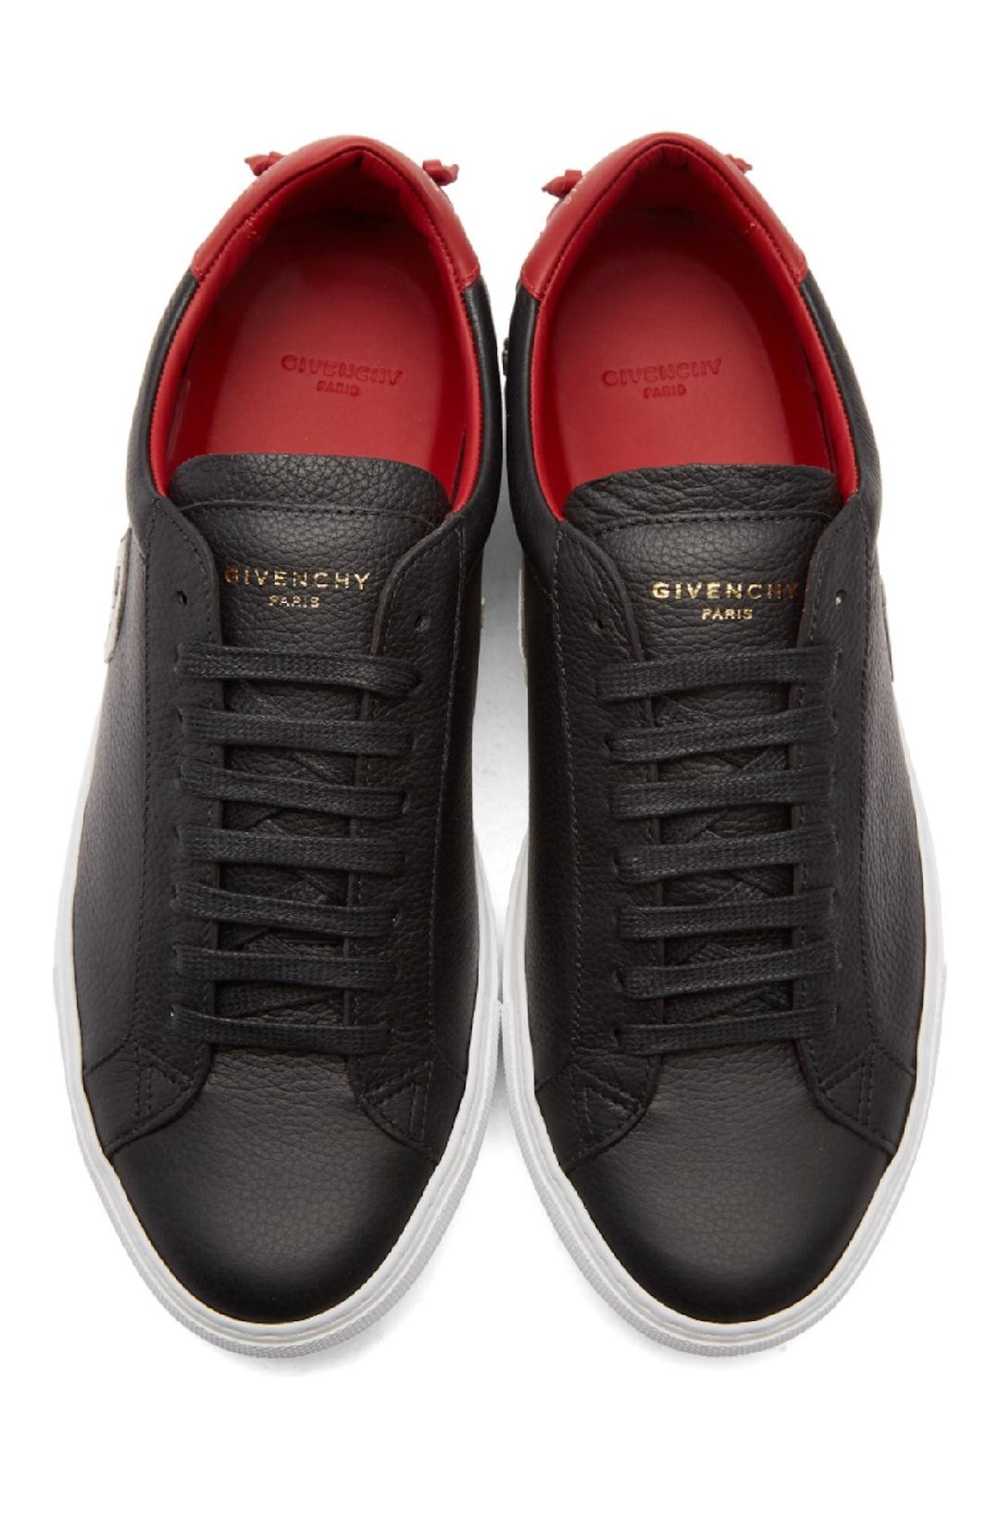 Givenchy Givenchy Urban Knot Street Low Sneaker - image 4